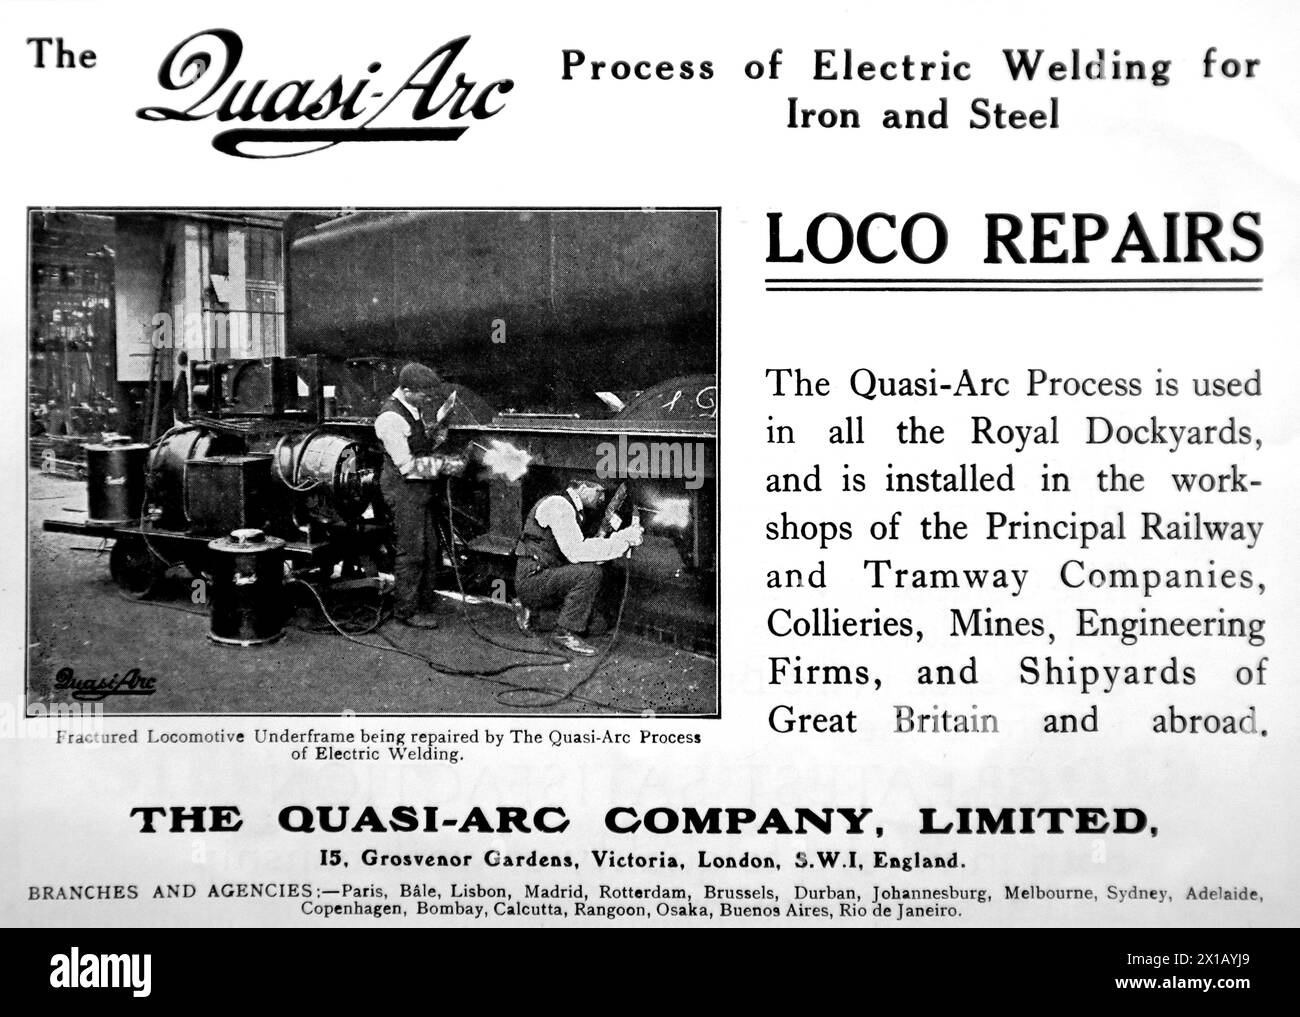 Advertisement for the Quasi-Arc Company Limited of Victoria, London, and with branches and agencies worldwide. Specialist in the Quasi-Arc process of electric welding for iron and steel. Pictured is a fractured locomotive underframe being repaired. From an original publication dated 15 May 1924, this helps to give an insight into public transport, and the railways in particular, of the 1920s. Stock Photo